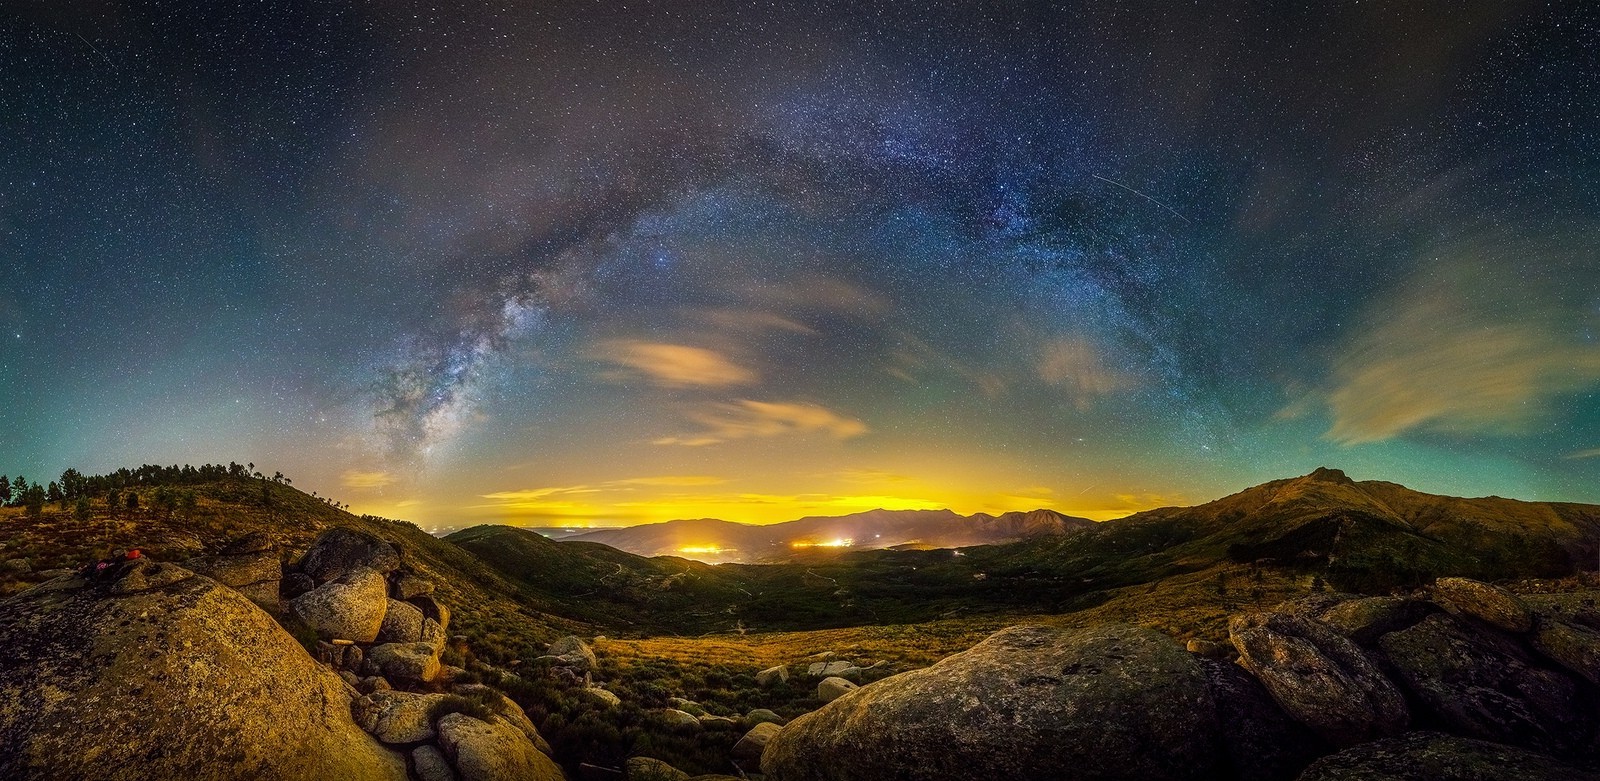 nature, Landscape, Photography, Milky Way, Starry Night, Galaxy, Hills, Lights, Long Exposure, Spain Wallpaper